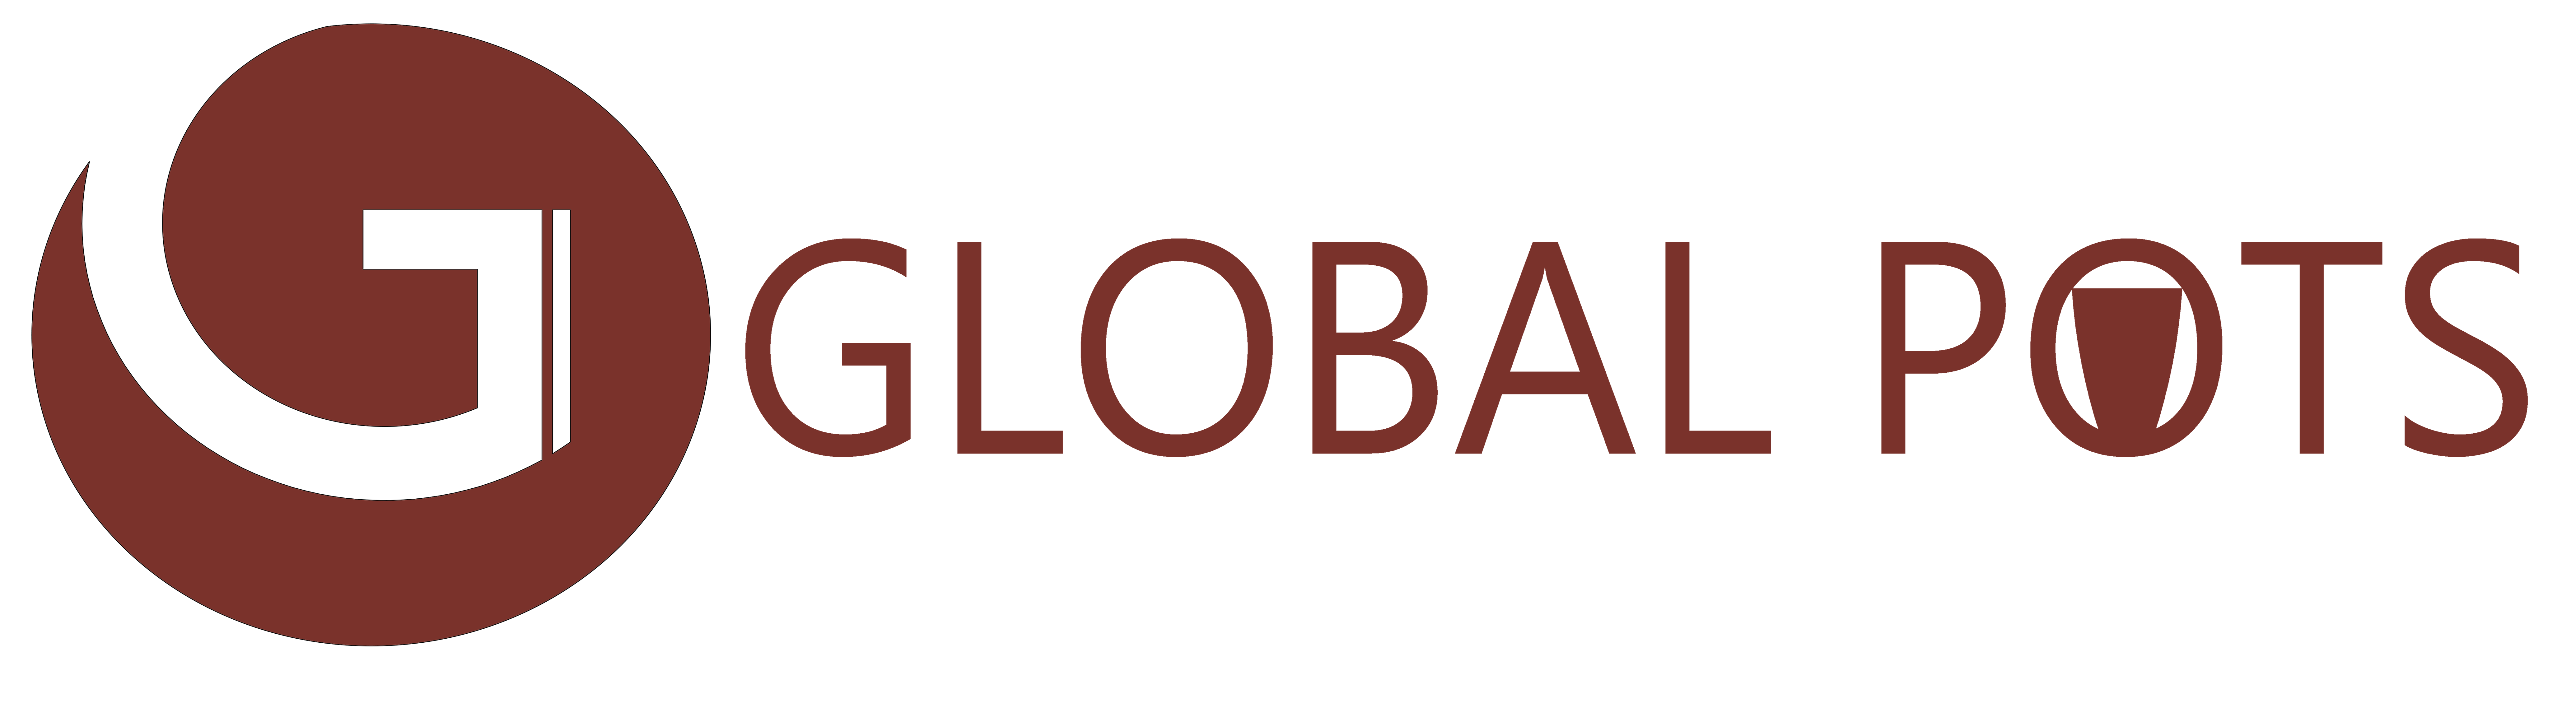 logo Global Pots - Spreading Tradition Across The World